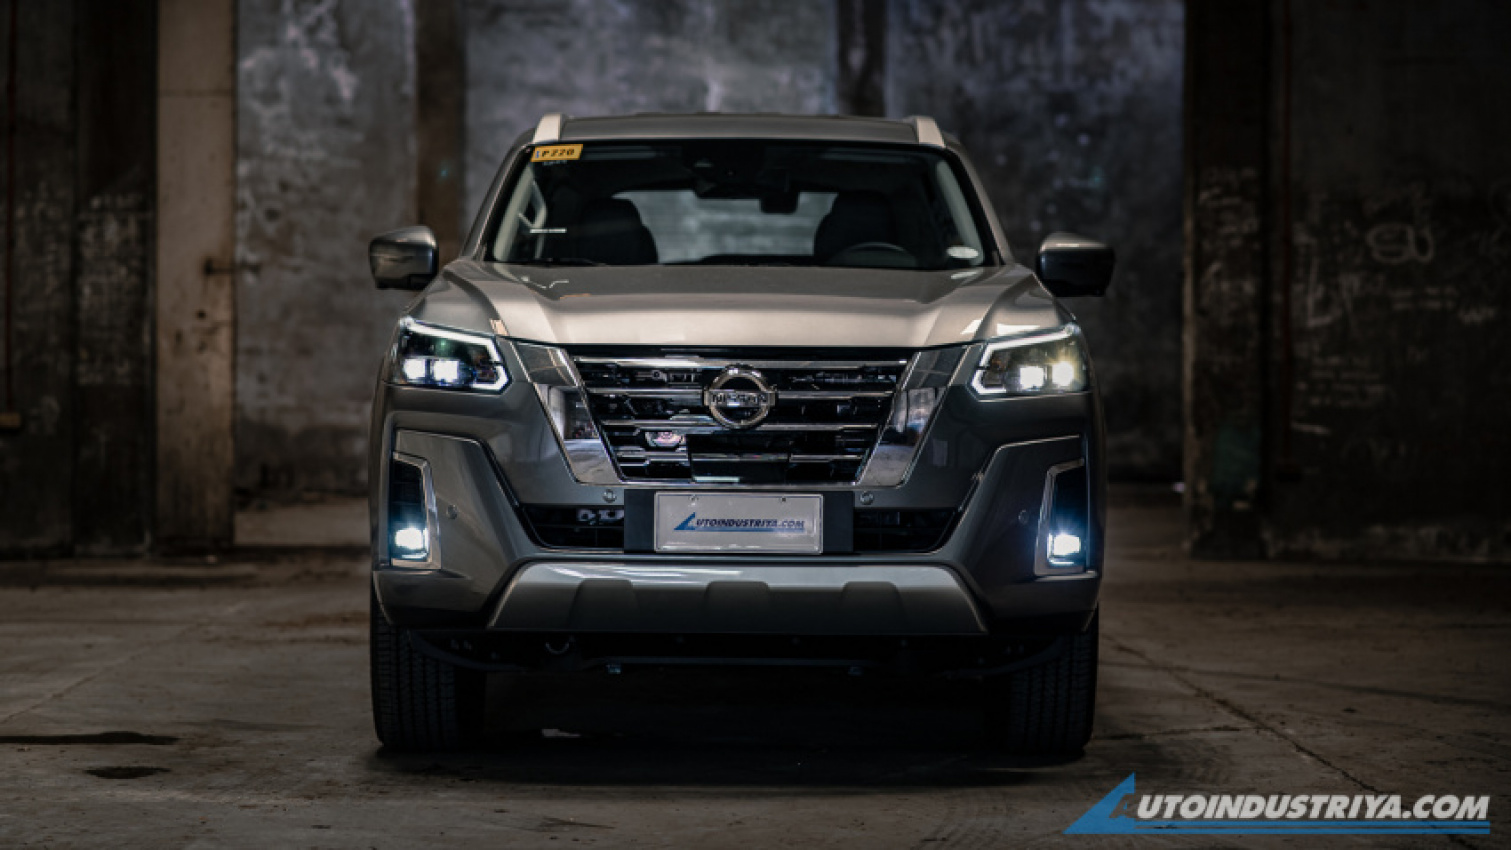 autos, car reviews, cars, nissan, reviews, android, nissan intelligent mobility, nissan philippines inc, nissan terra, nissan terra vl 4x2, vl 4x2, android, 2022 nissan terra vl 4x2 7at